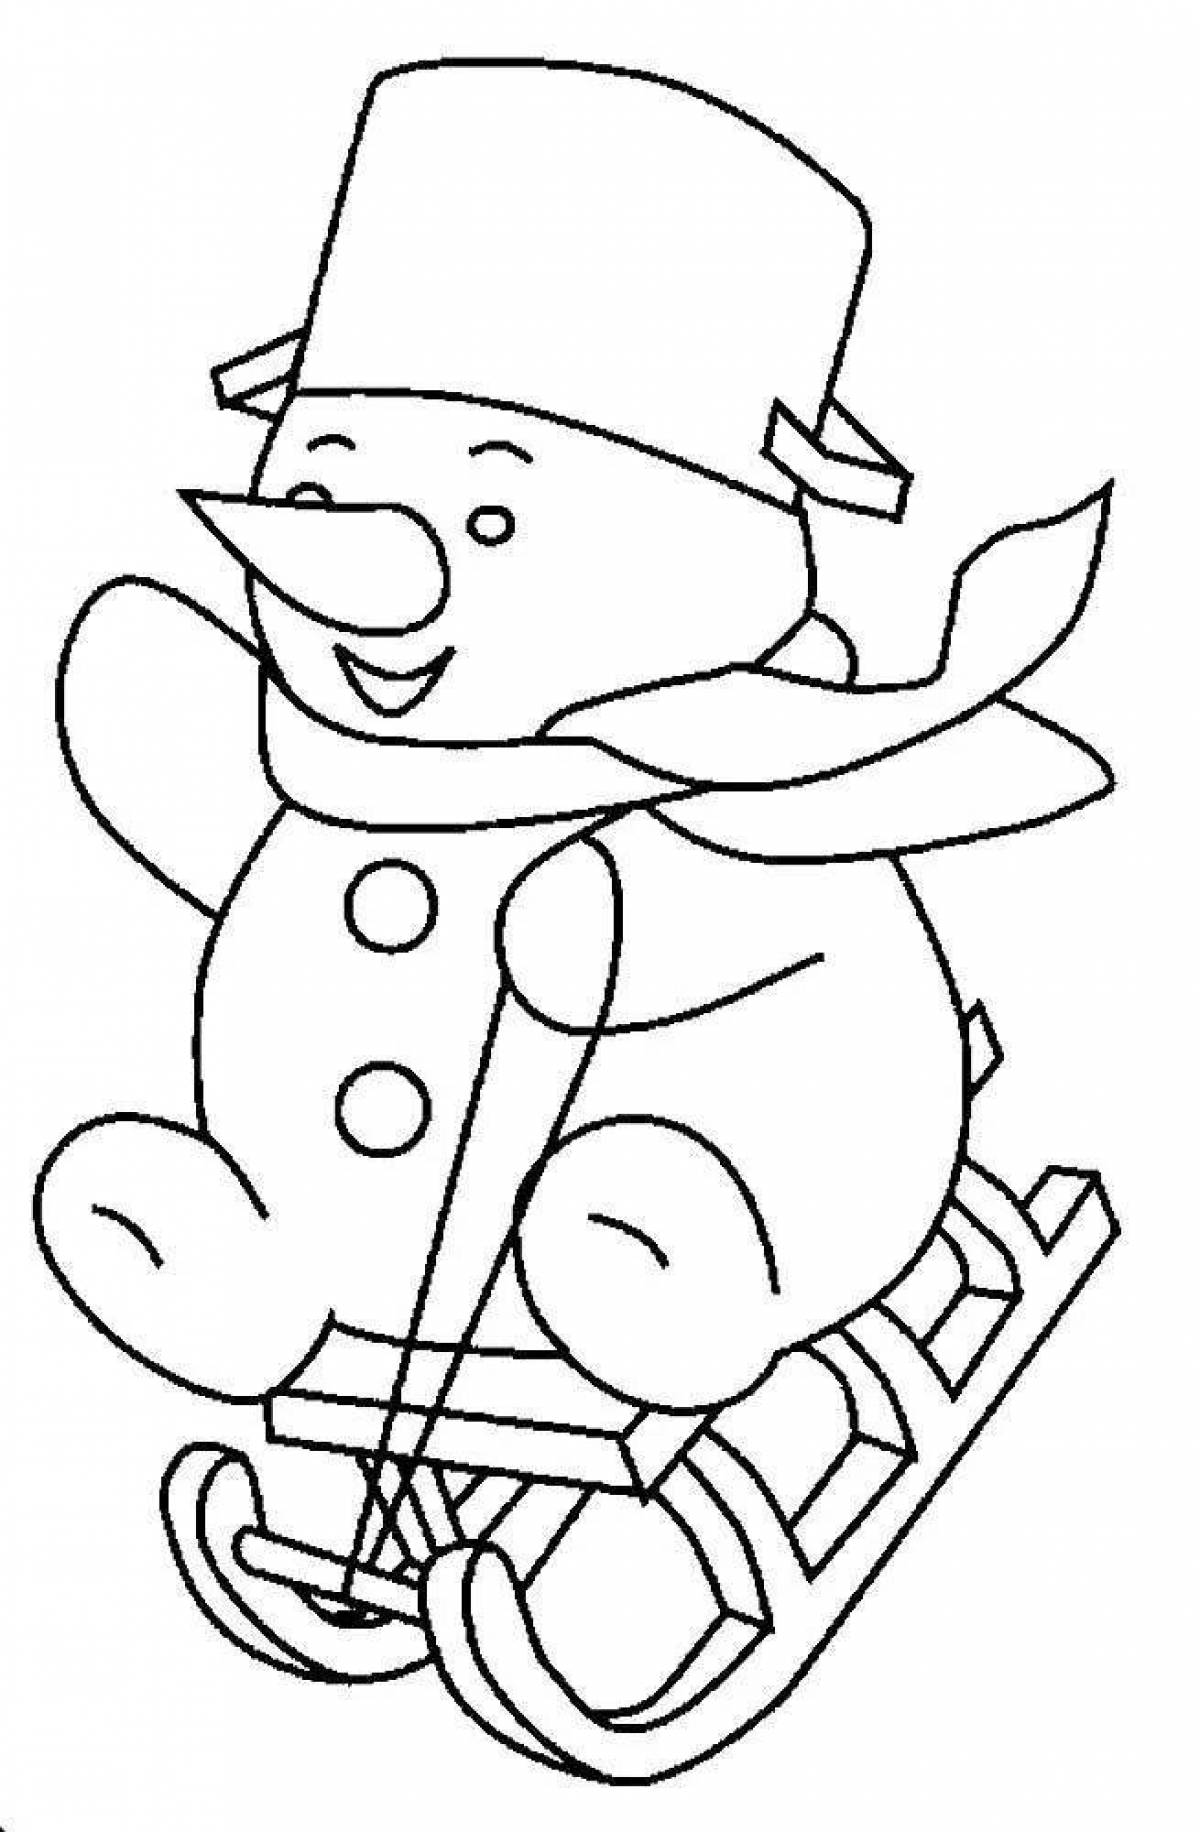 Amazing coloring pages for kids winter 2 3 years old